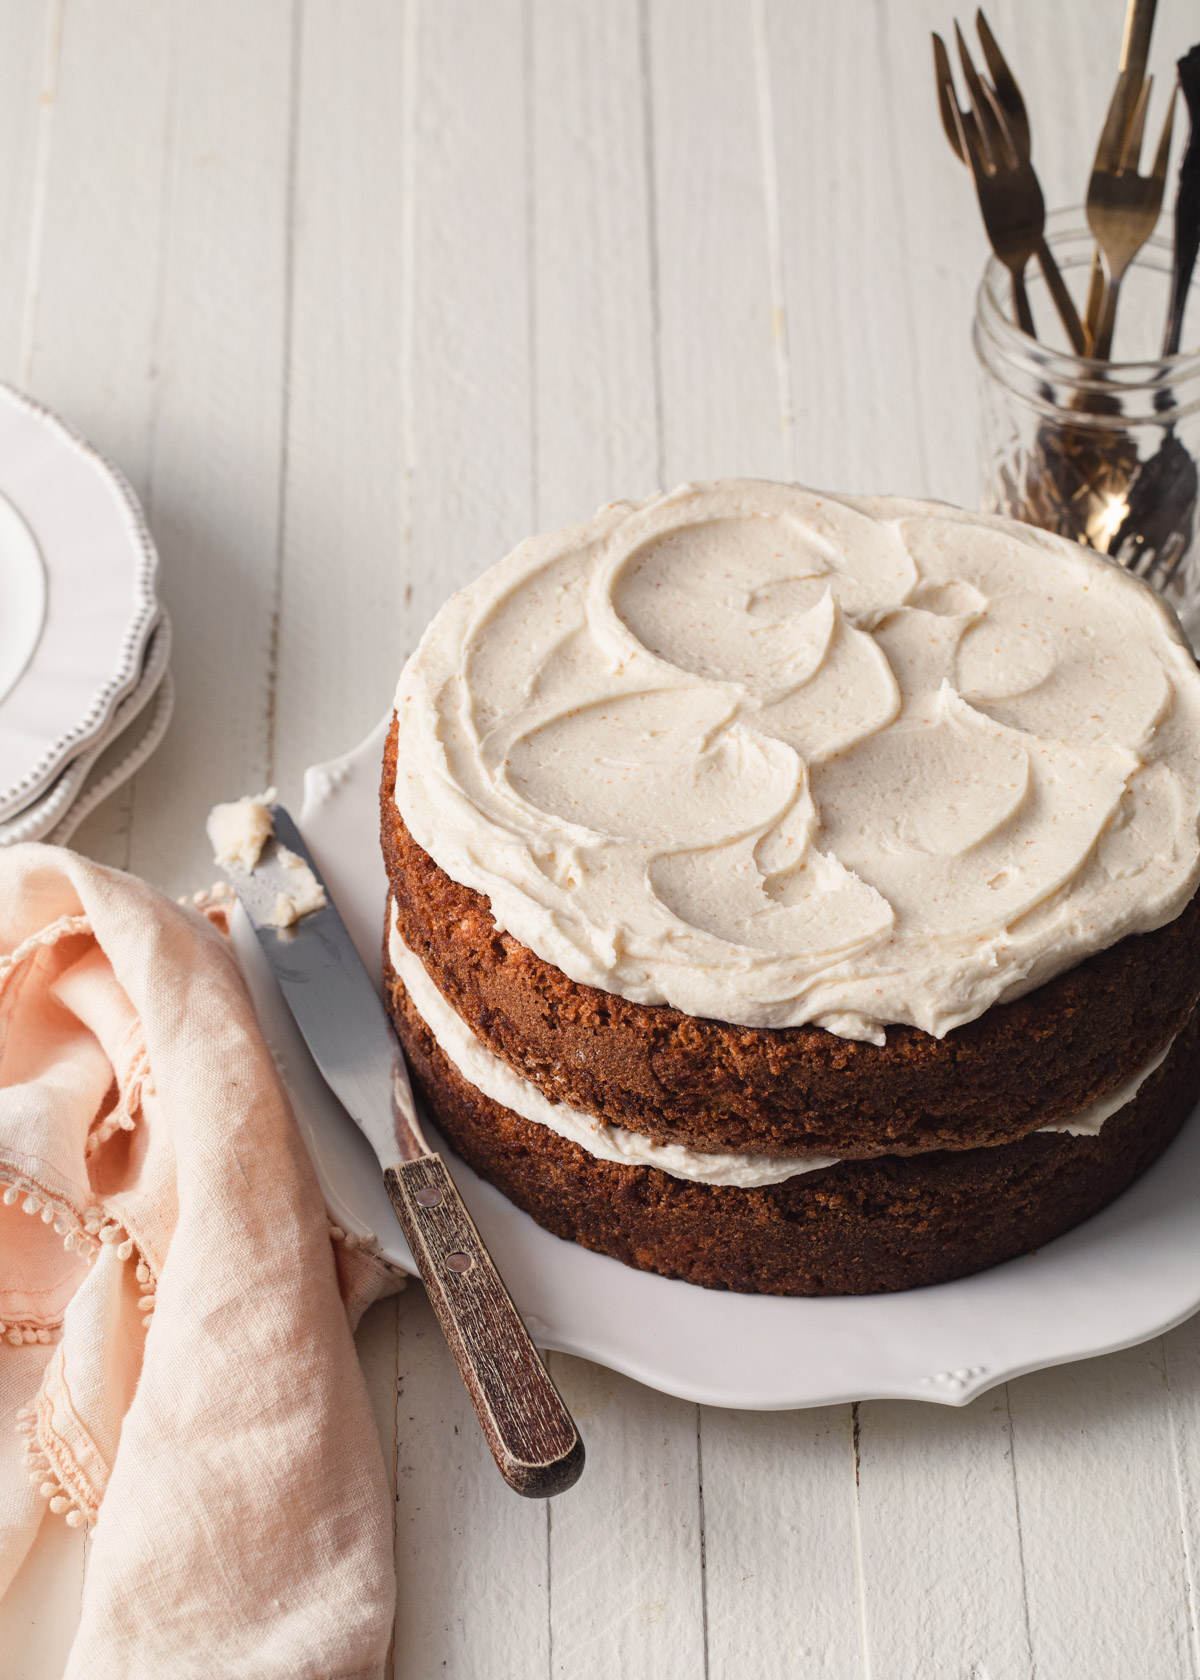 A two-layer carrot cake with brown butter frosting